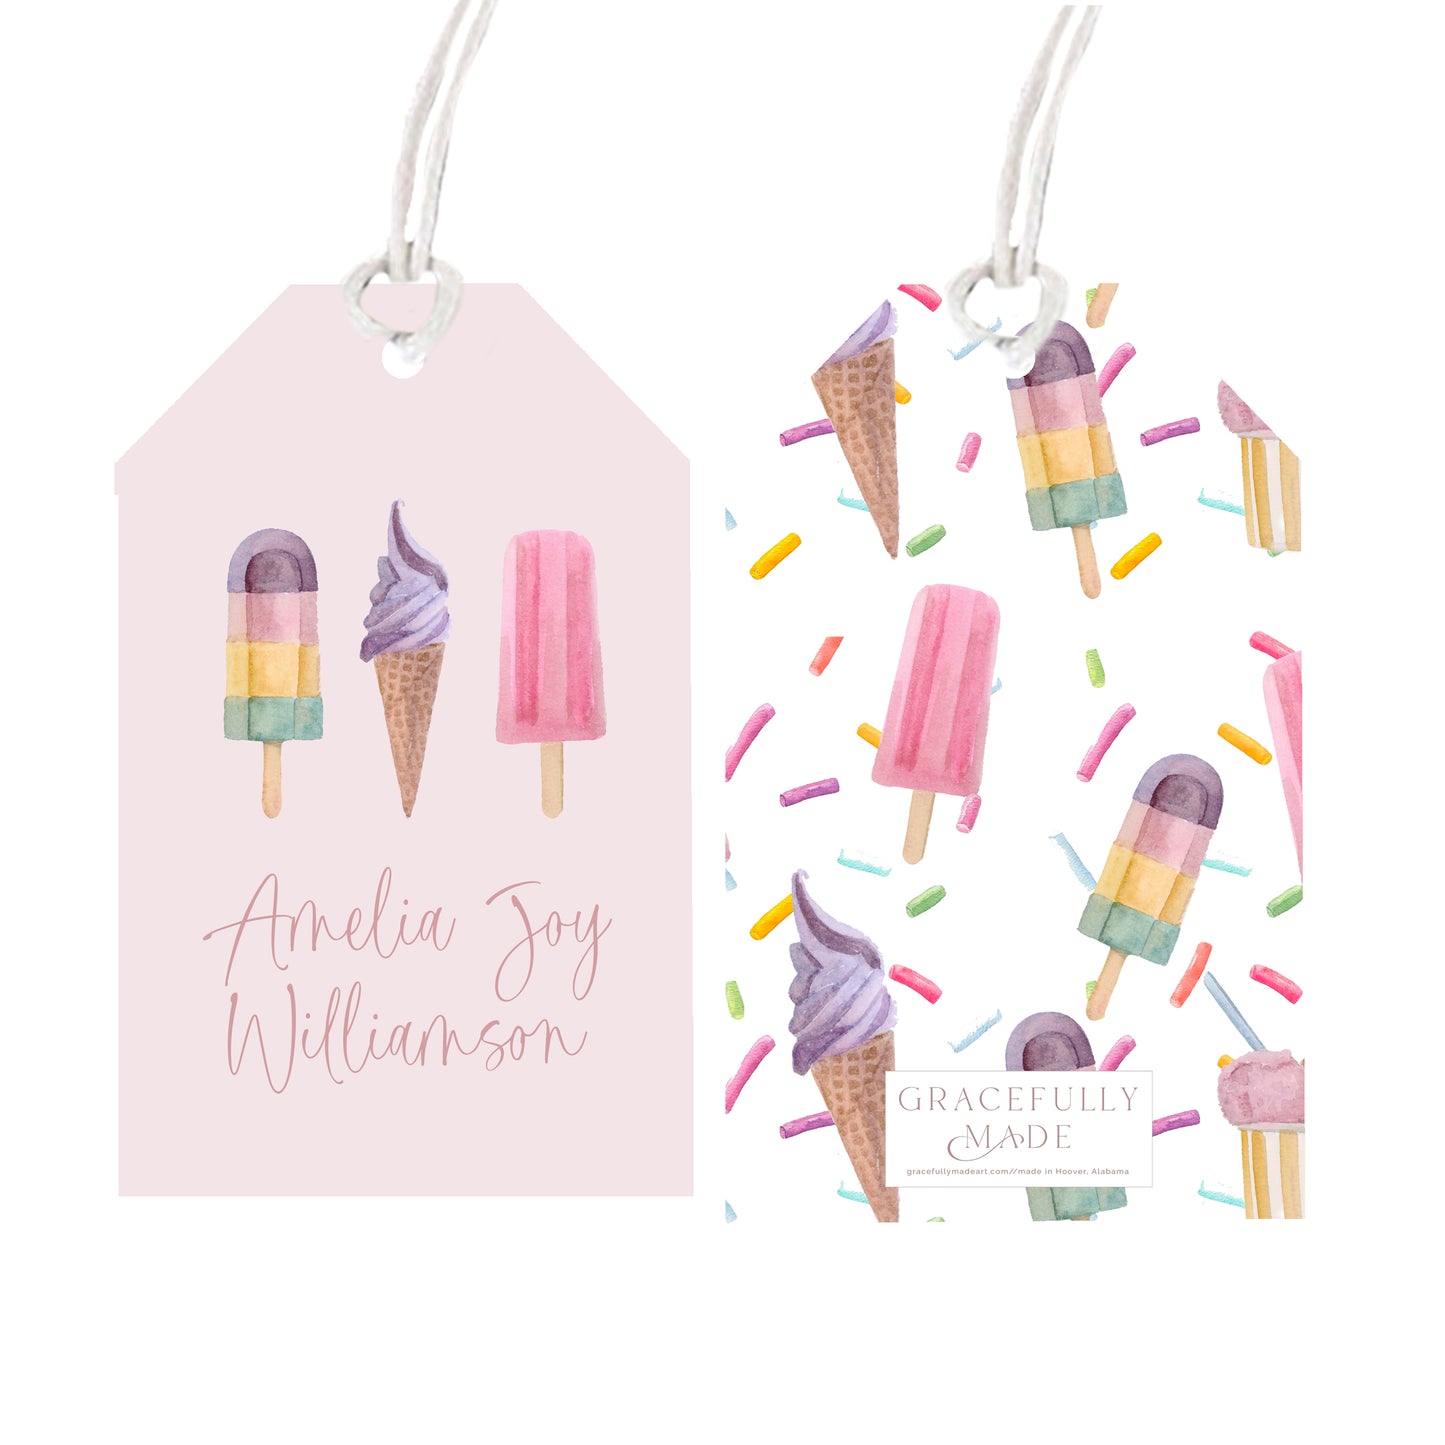 Personalized ice cream gift tags